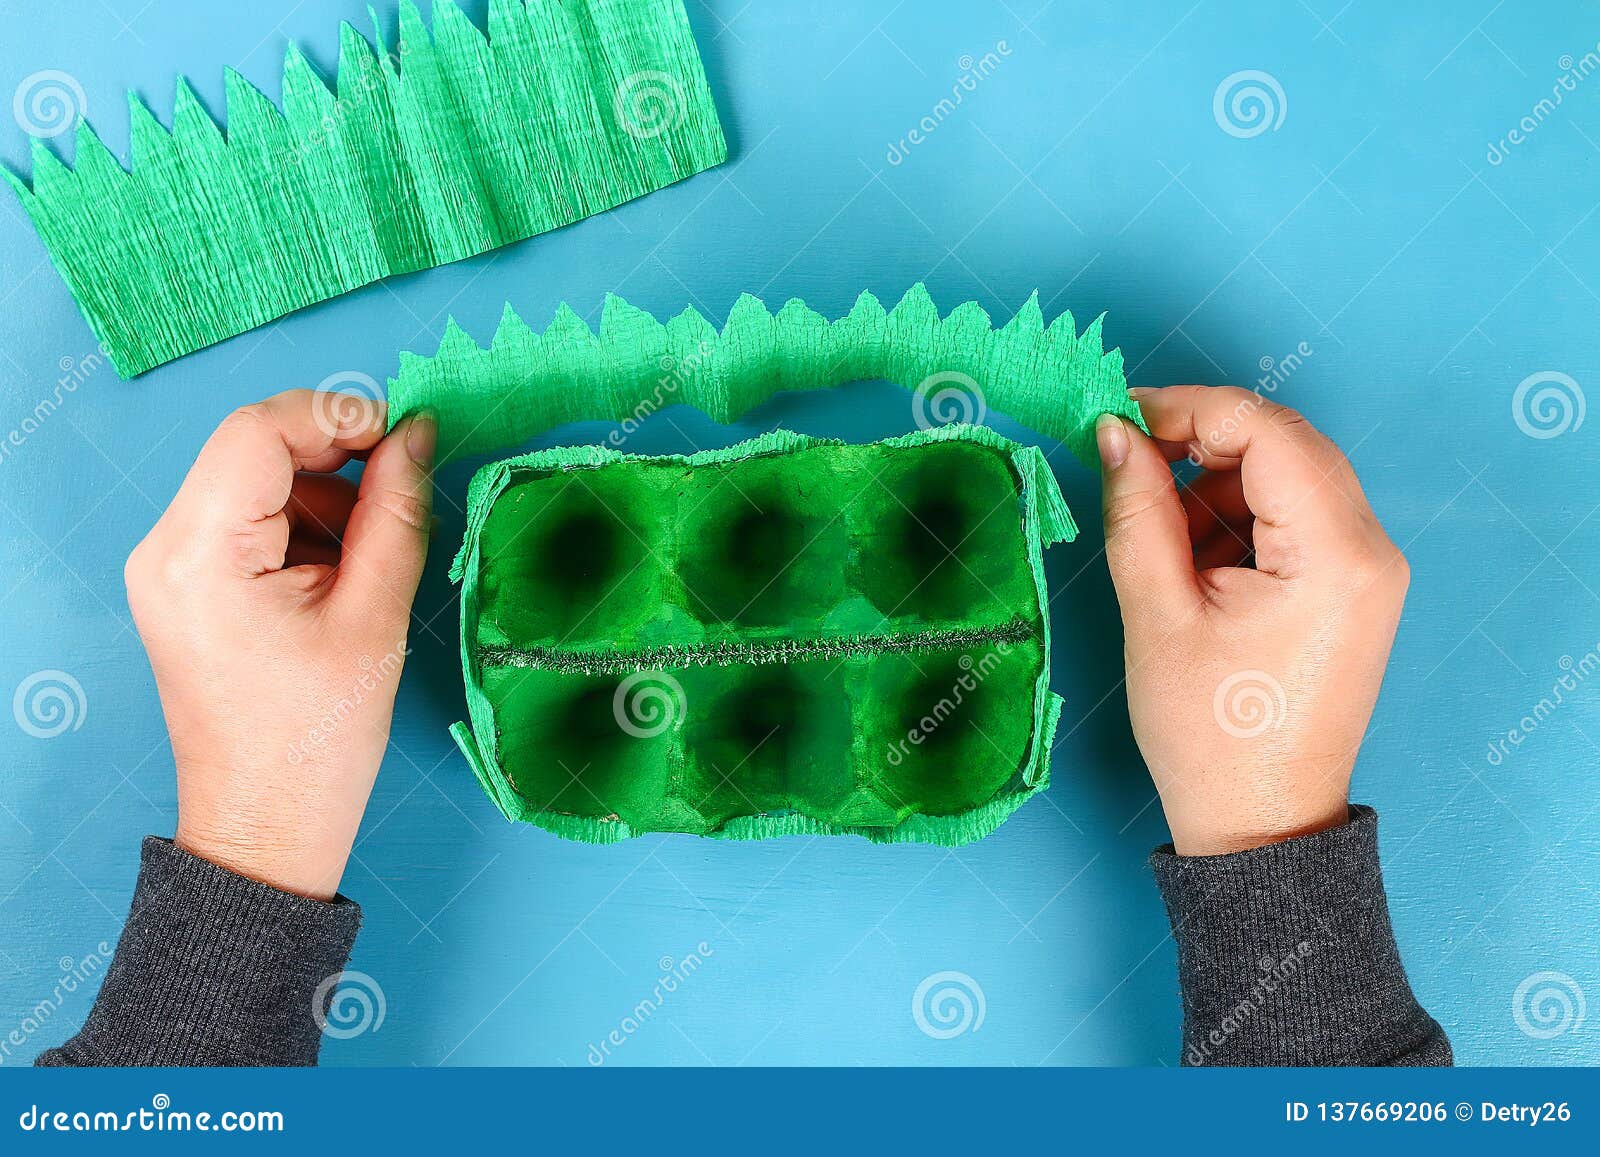 DIY Basket Easter Egg from Cardboard Tray, Crepe Paper, Chenille Stem on  Blue Background Stock Photo - Image of children, holiday: 137669206